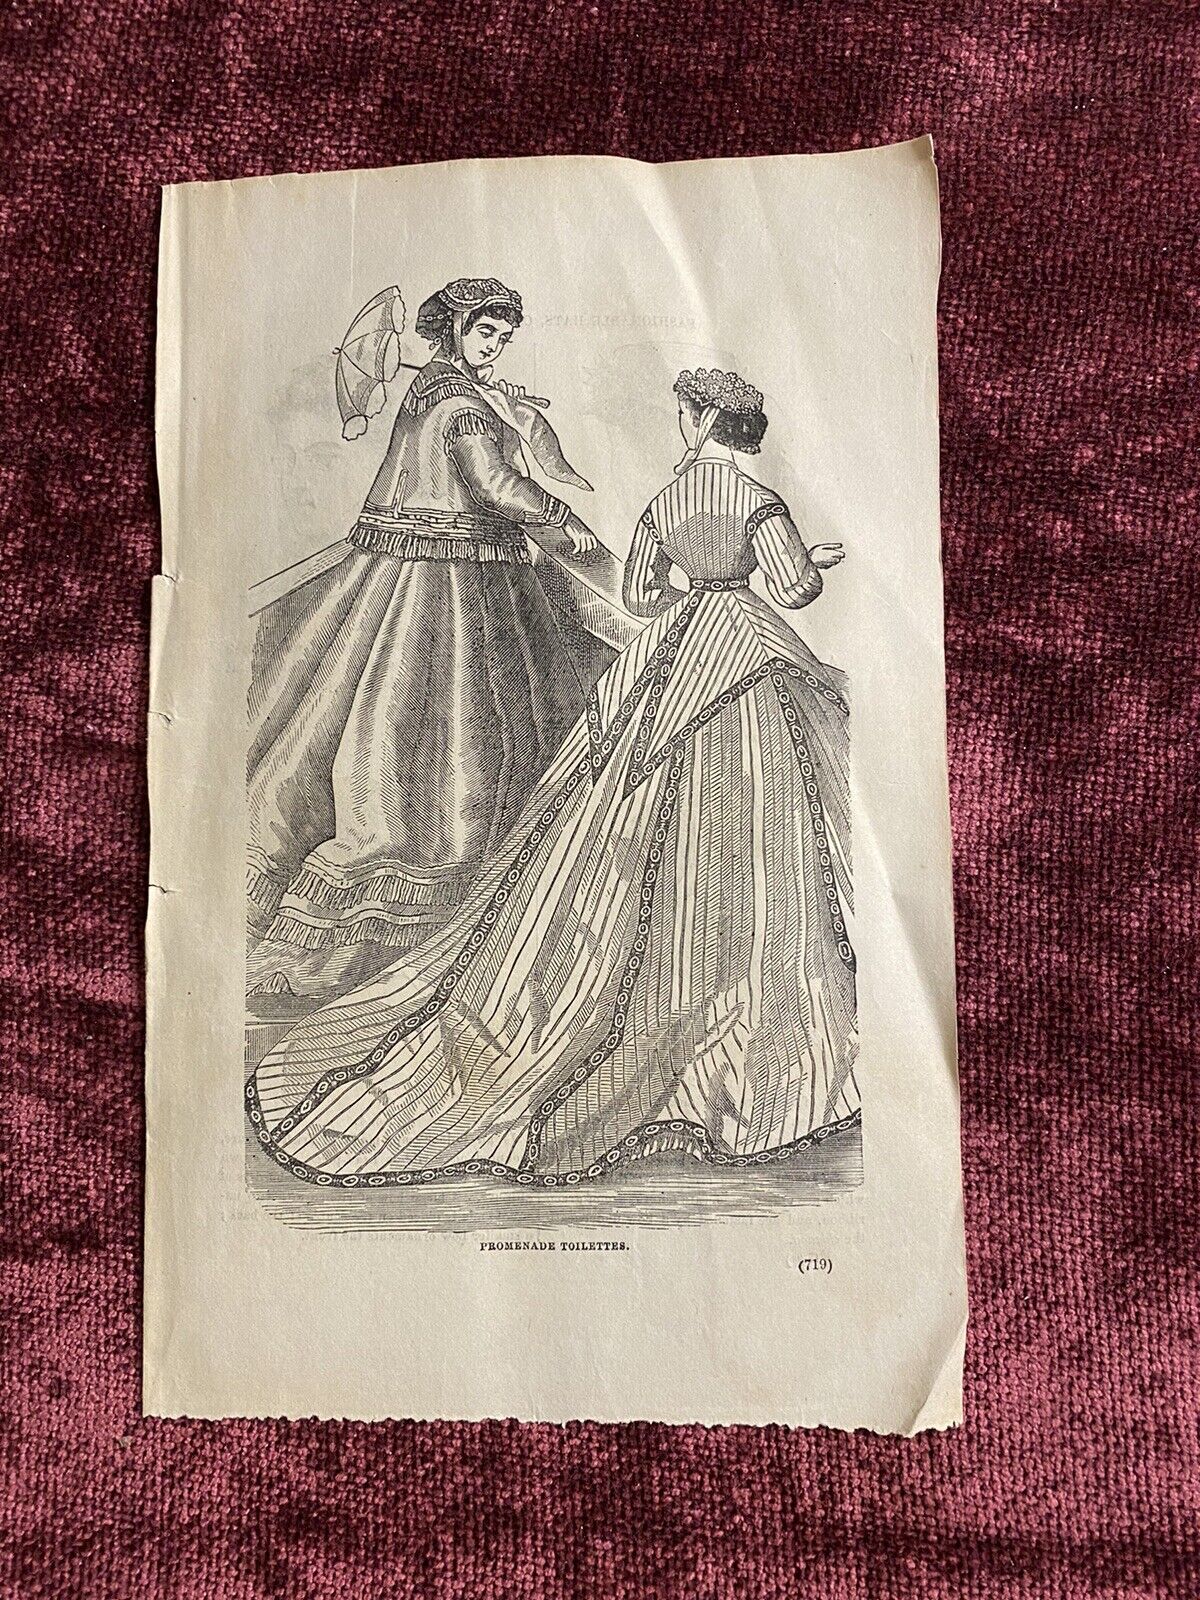 Vintage Lithograph Of Two Ladies From the November 1866 Lady’s Friend Magazine